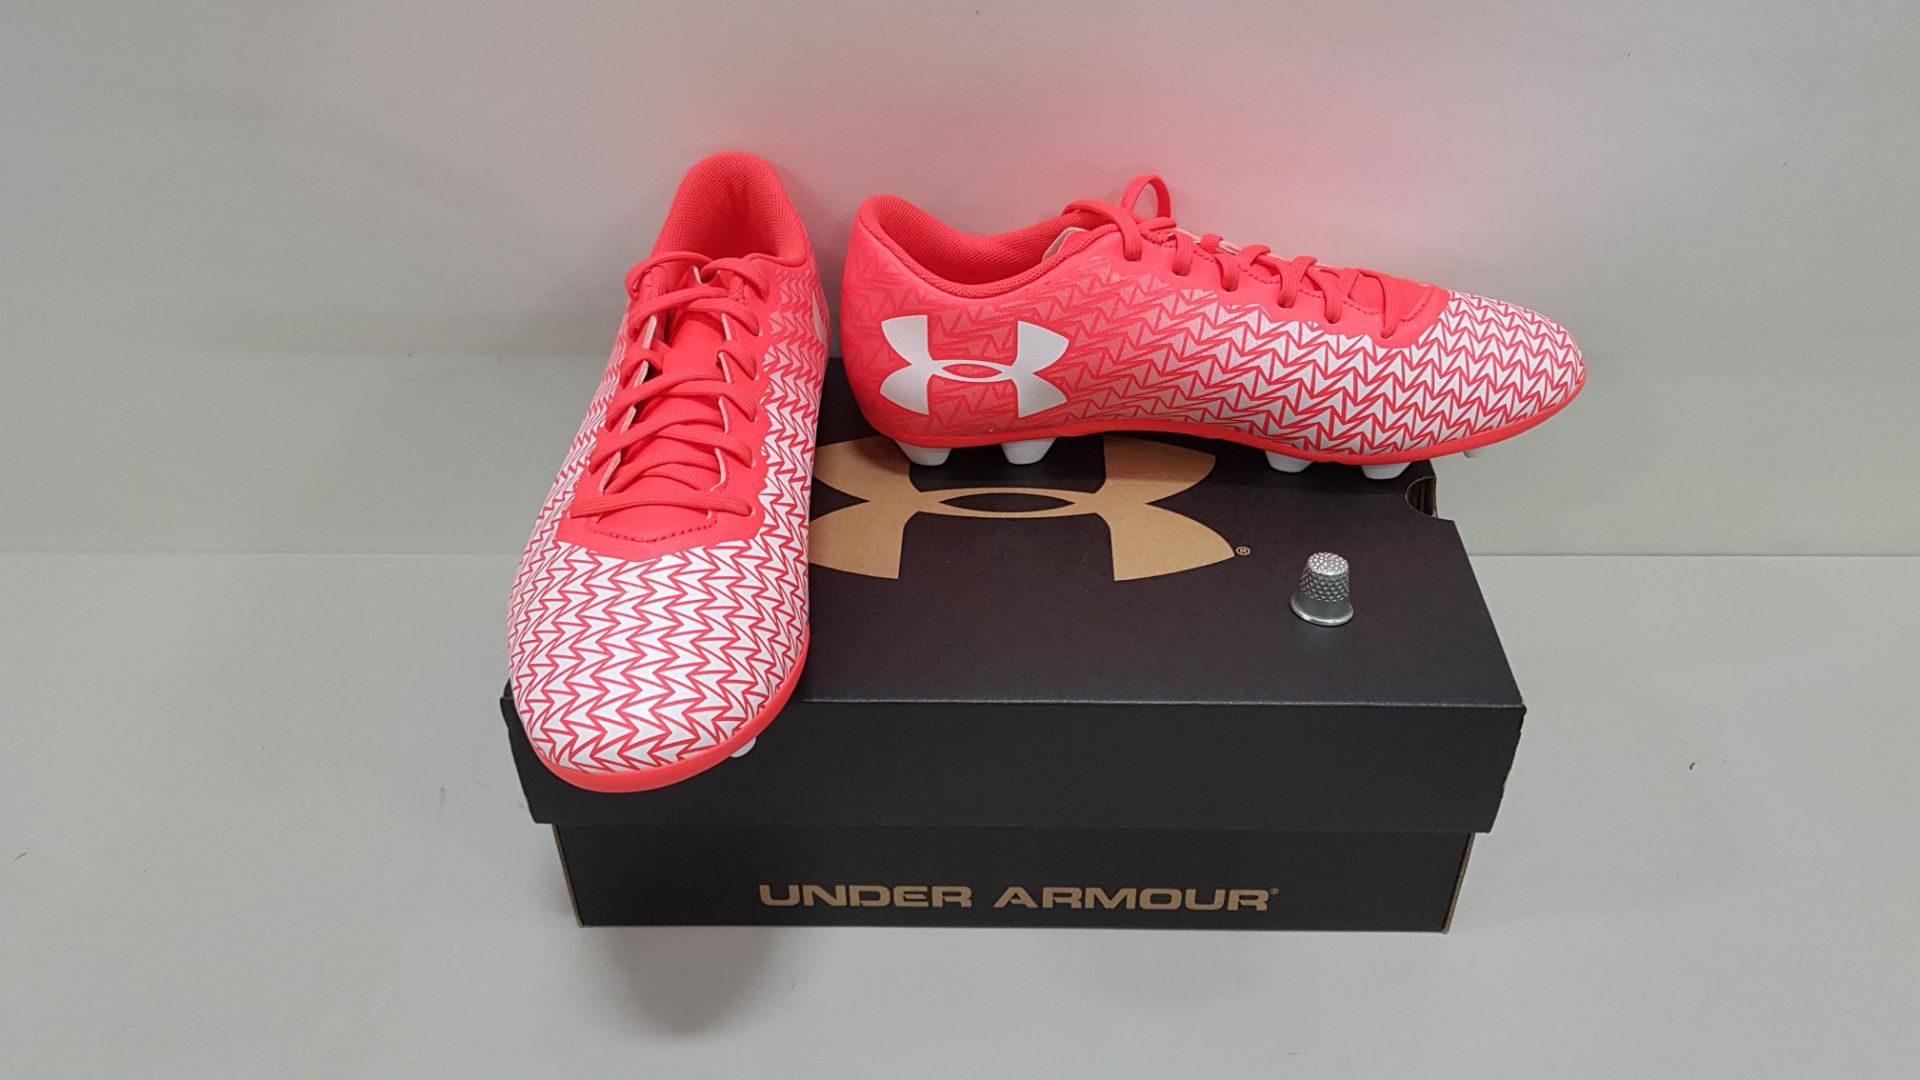 6 X BRAND NEW UNDER ARMOUR CF FORCE 3.0 FG-R-JR FOOTBALL BOOTS UK SIZE 3.5, 3, 4 AND 5.5